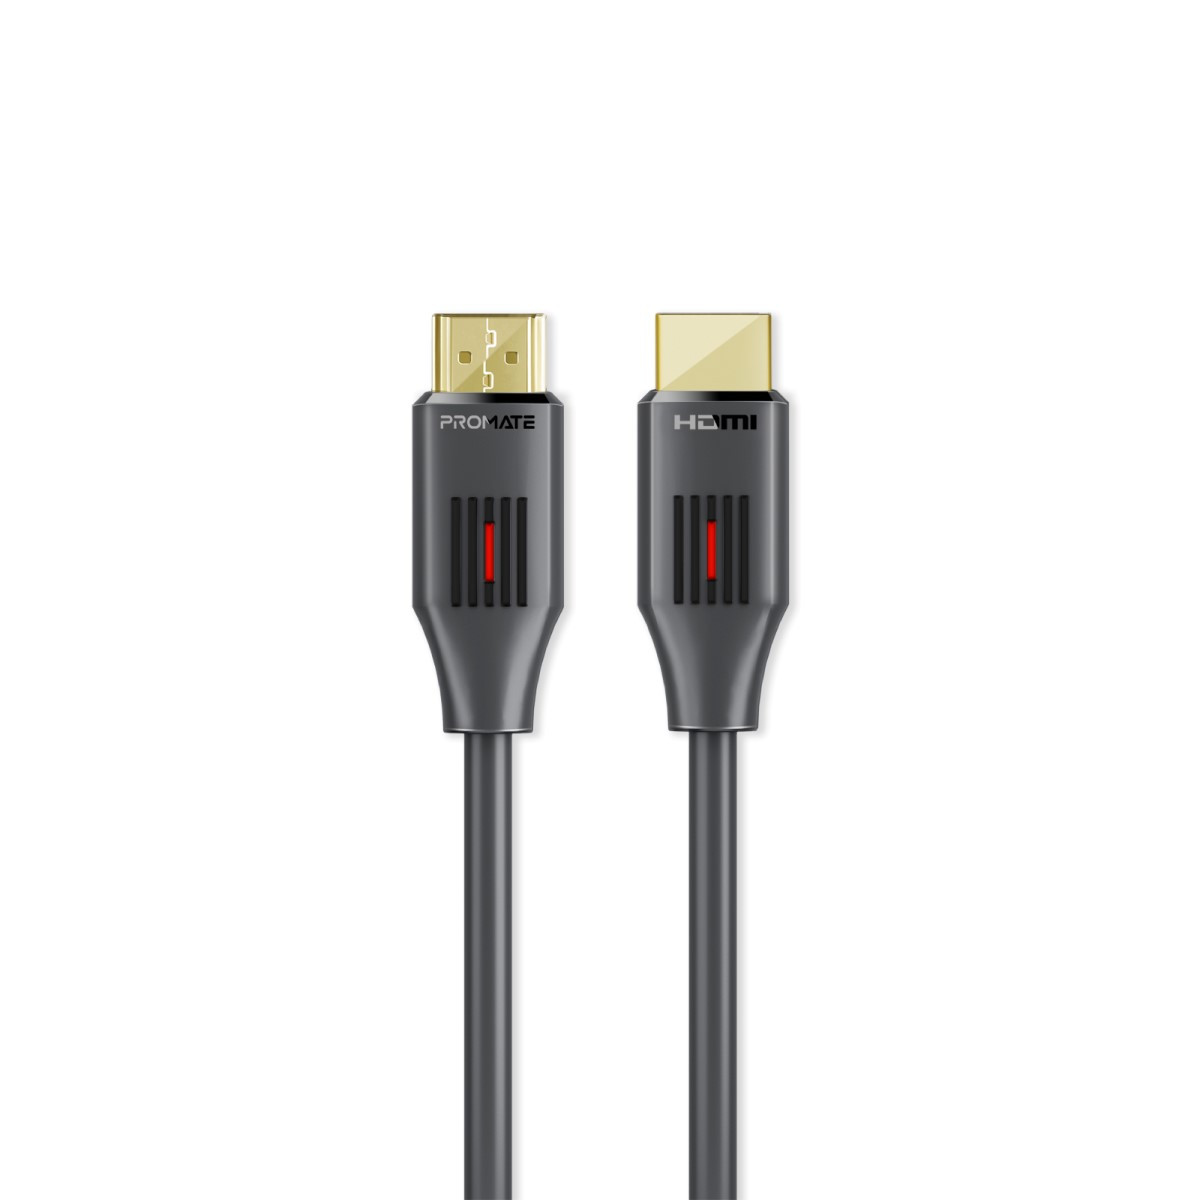 Promate HDMI 2.0 Cable, 4K@60Hz HDMI to HDMI Slim 10m Cable with 3D Video Support, 9Gbps Bandwidth, Ethernet Support and Gold-Plated Connectors for Laptops, Smart TVs, Monitors, ProLink4K60-10M